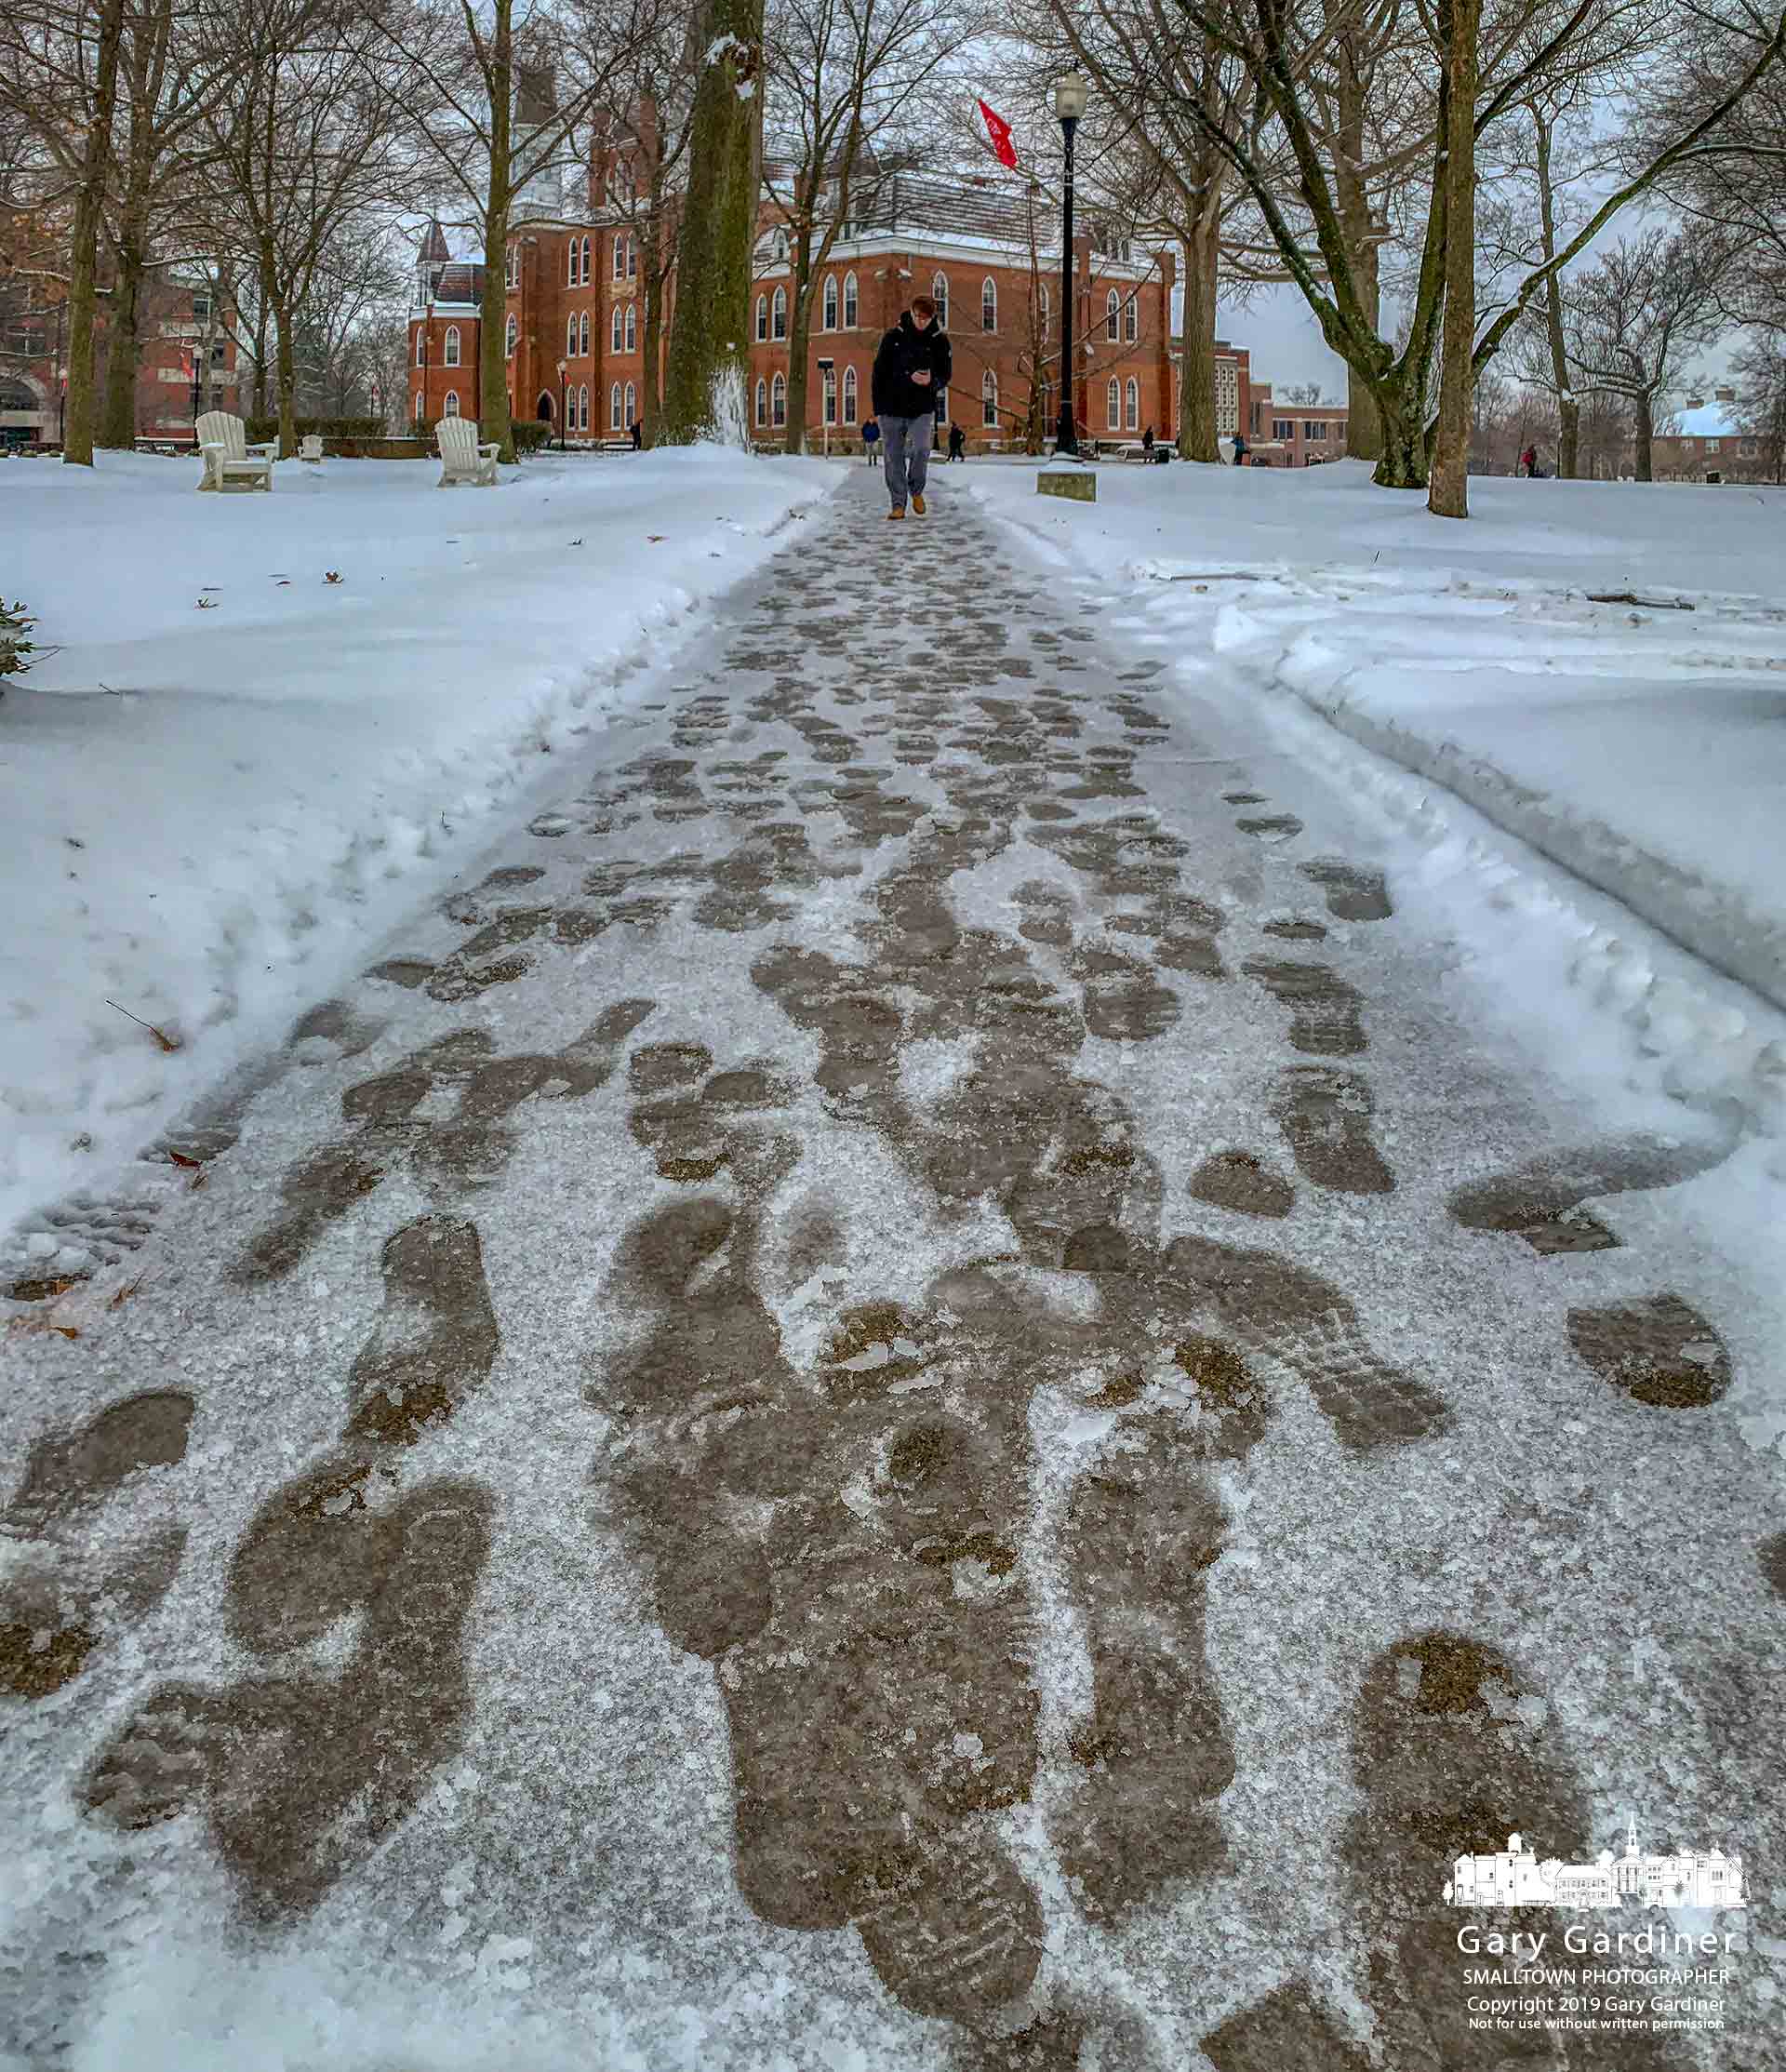 A collection of footprints leads to and away from Towers Hall at Otterbein University after an overnight snowstorm dropped more than three inches of snow that continued to fall after the school's sidewalks were first cleared. My Final Photo for Feb. 20, 2019.